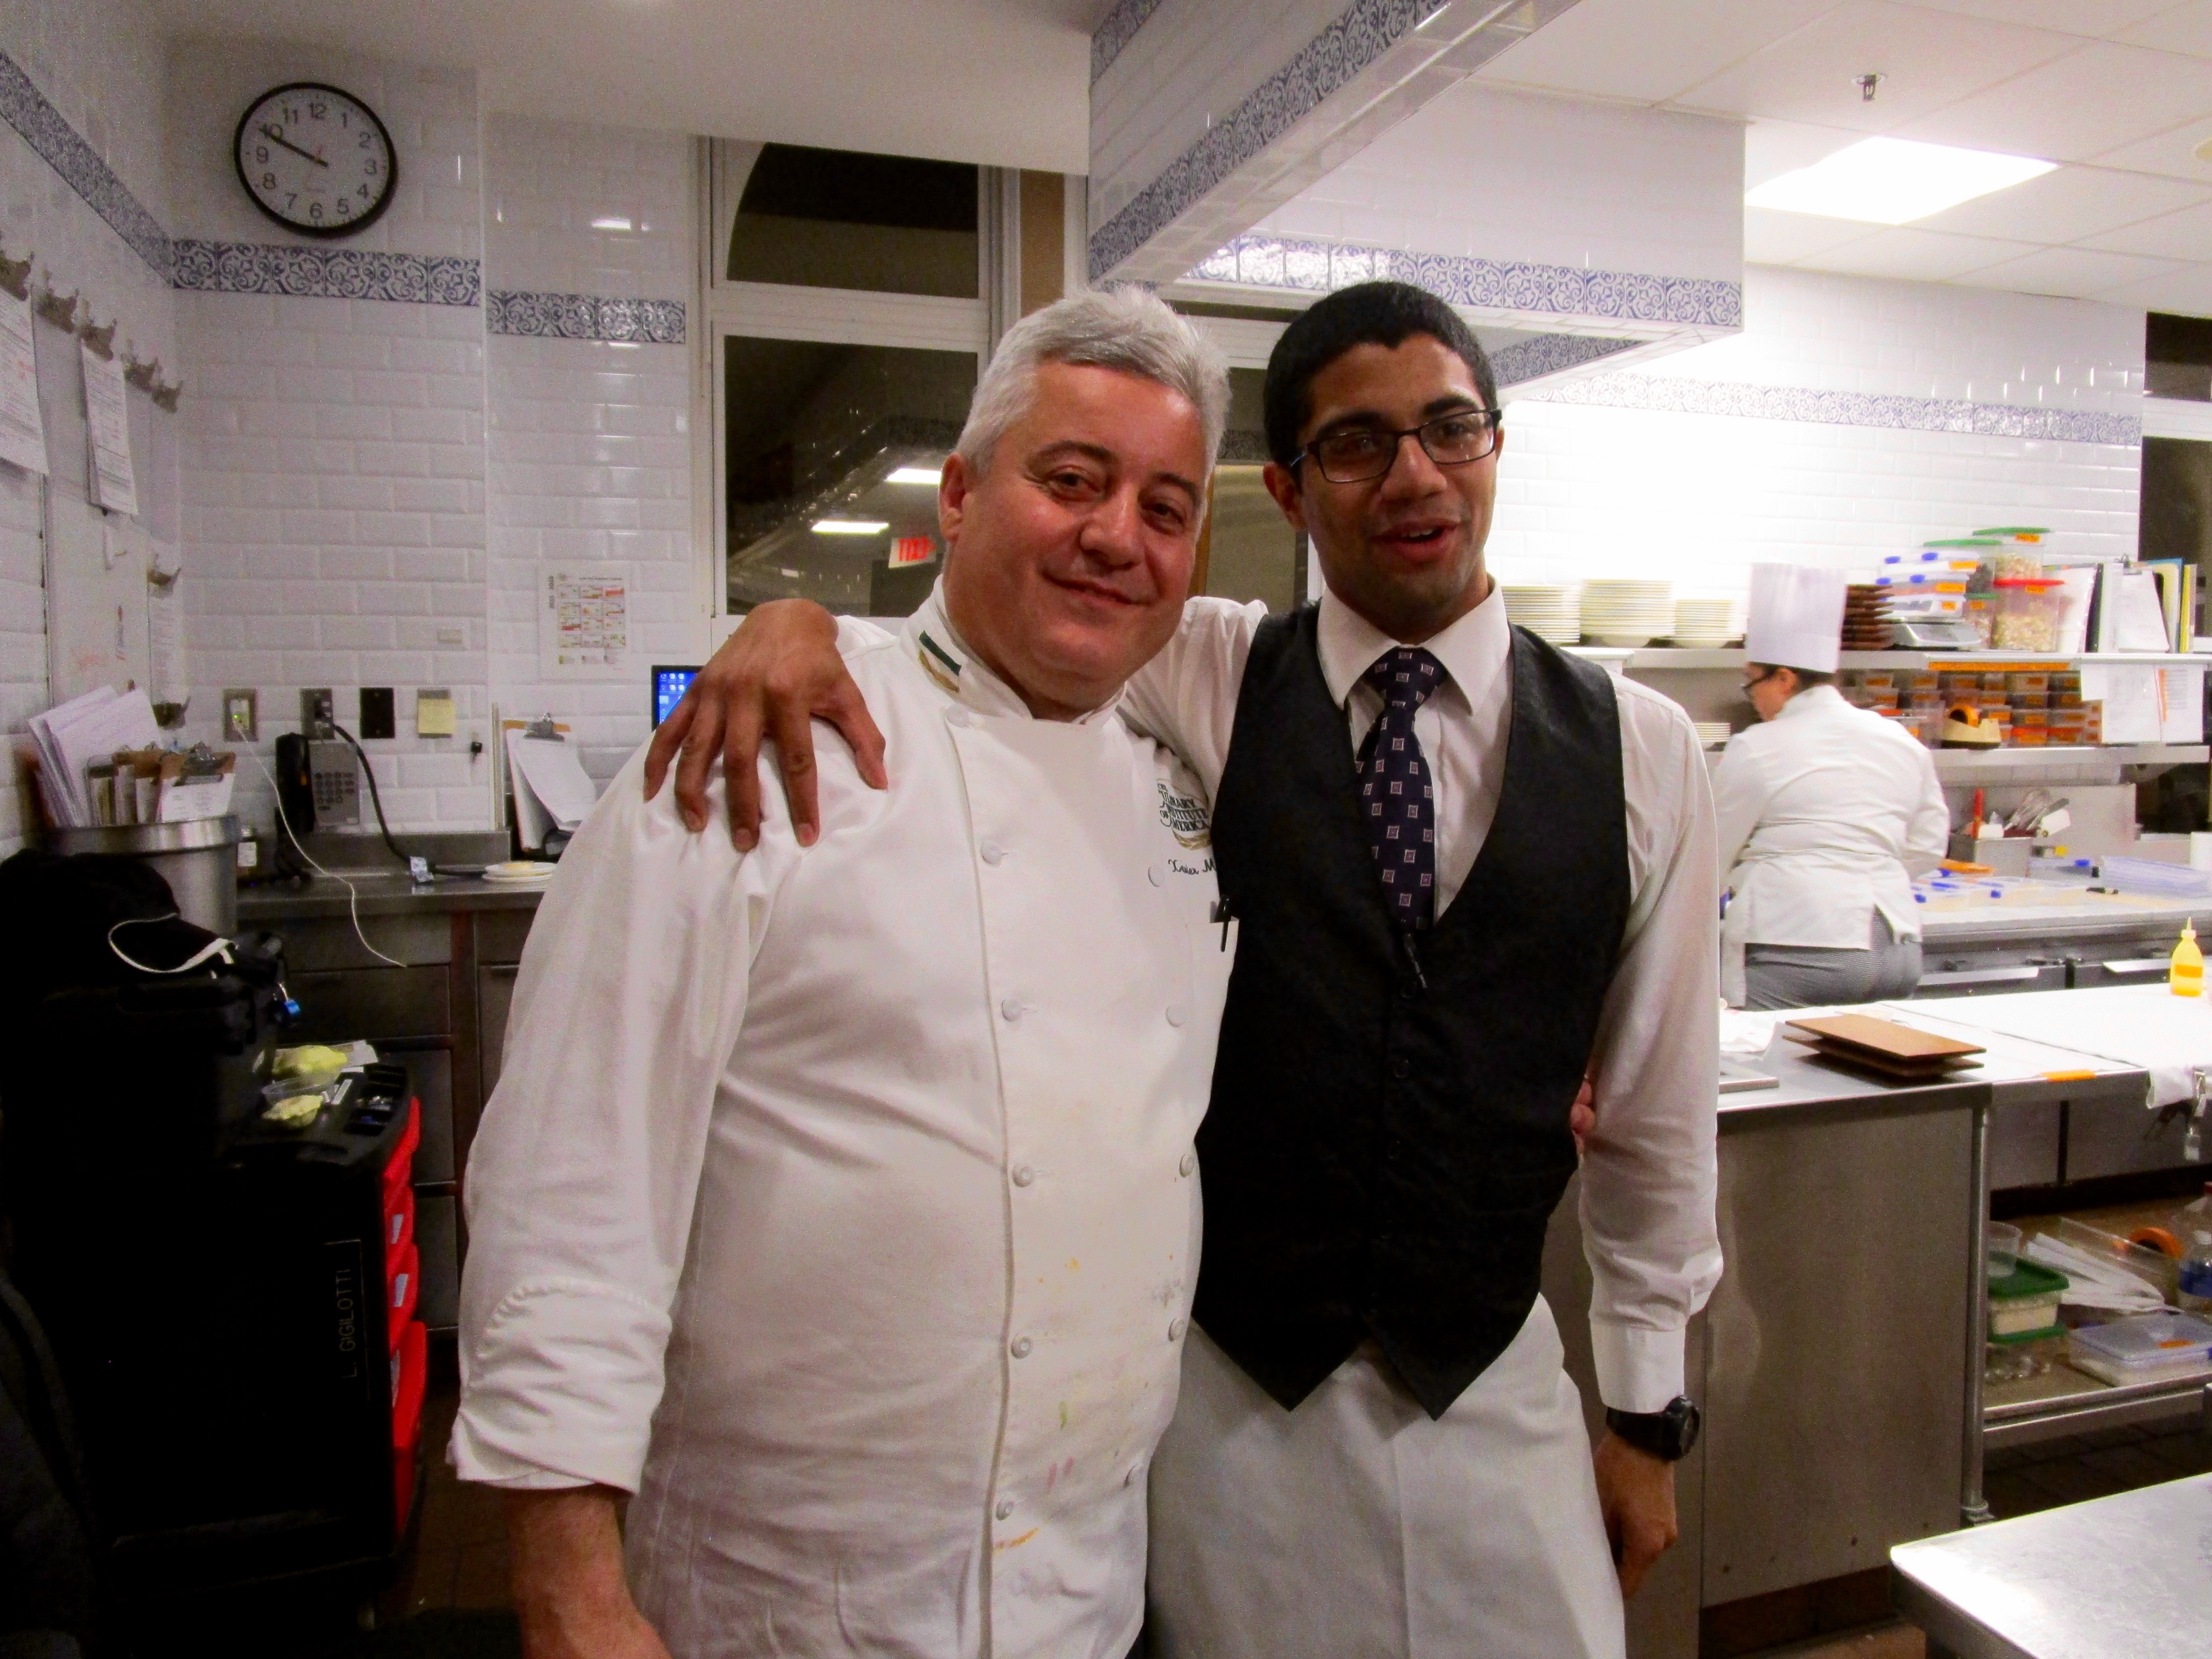 WE ALL WERE INVITED INTO THE KITCHEN FOR A TOUR (No, we didn't ask!).  THIS IS THE PROFESSOR CHEF AND OUR STUDENT WAITER. 